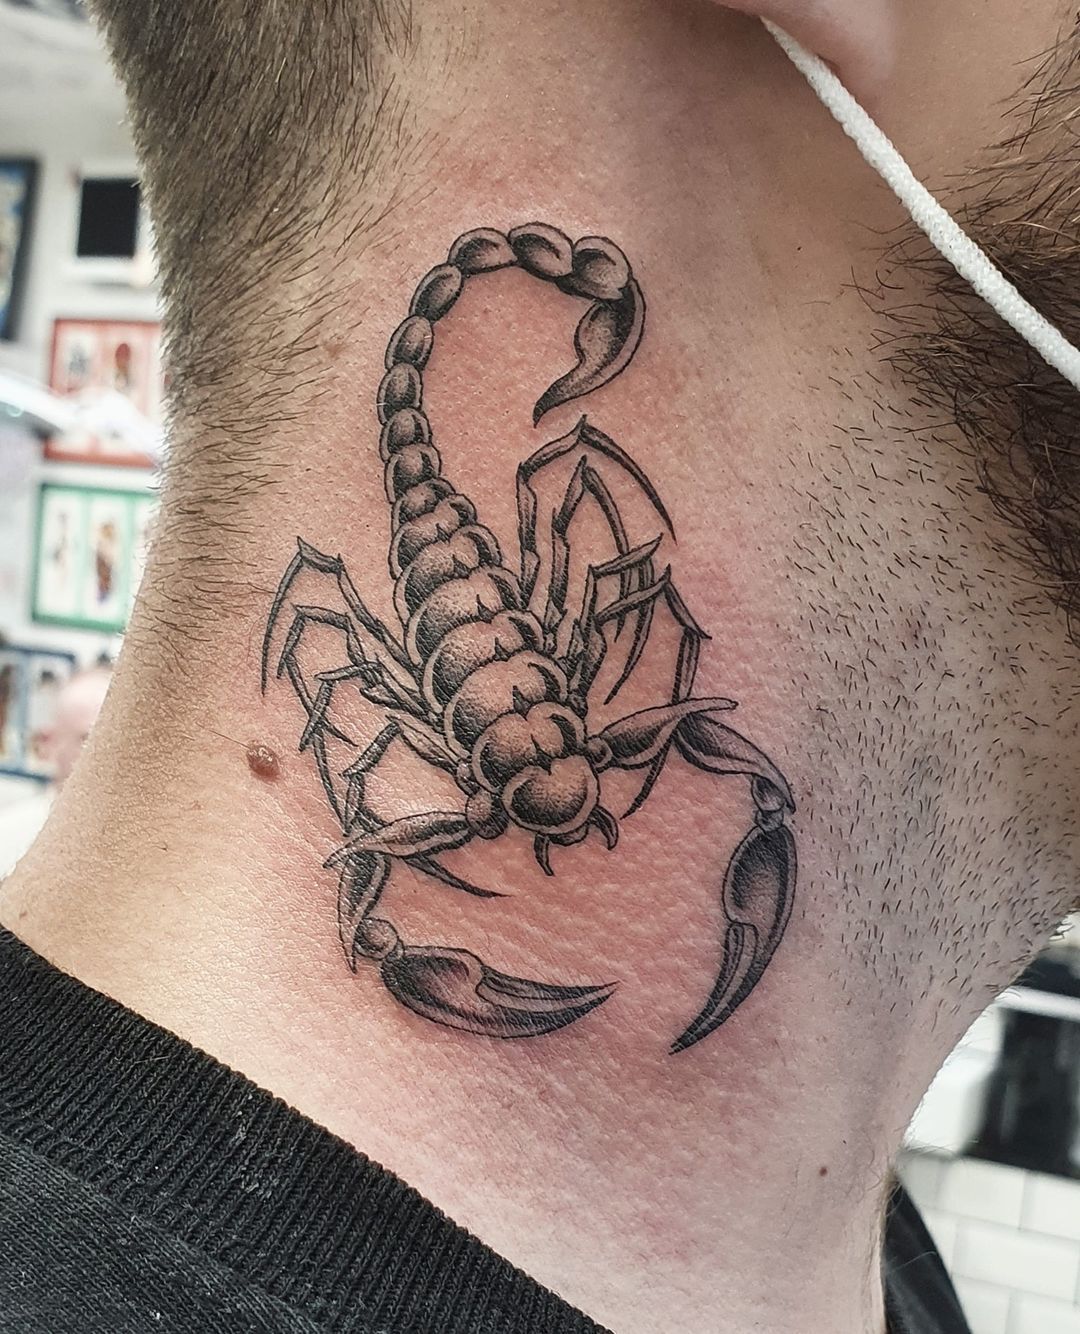 Living Art Gallery - Scorpion tattoo by Hannah @tangerine.tattoos Visit  sclivingartgallery.com to book your next tattoo. Military discount 🇺🇸  #forearmtattoo #scorpiontattoo #armtattoo #lineworktattoo #dotworktattoo  #dotwork #stipple #whipshade ...